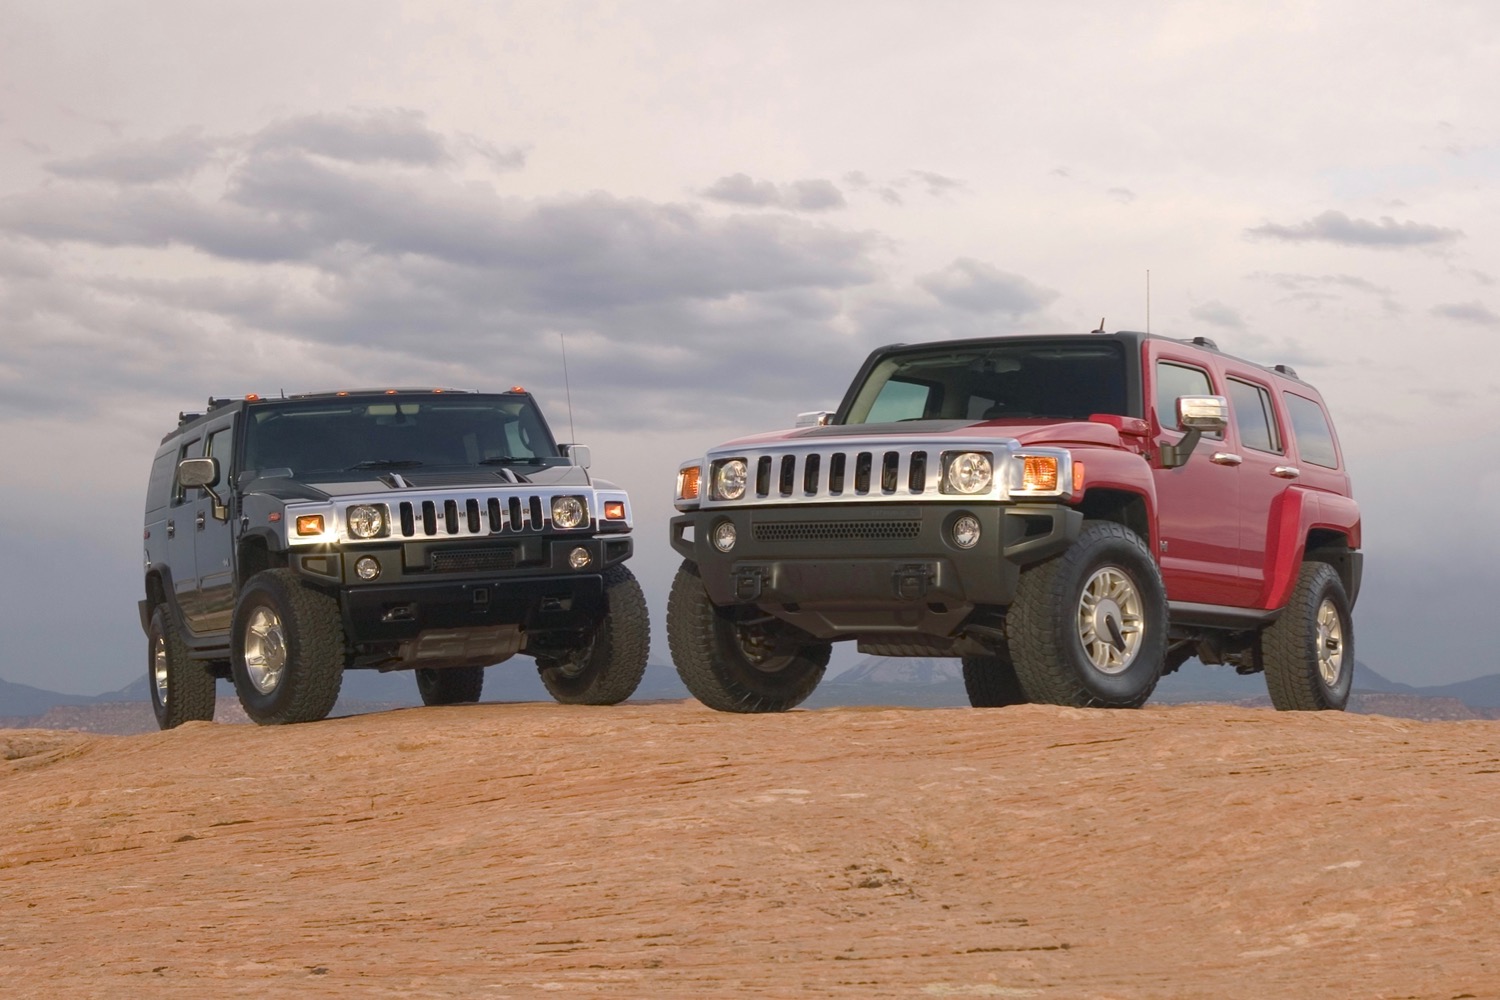 Hummer H2 and Hummer H3 SUVs